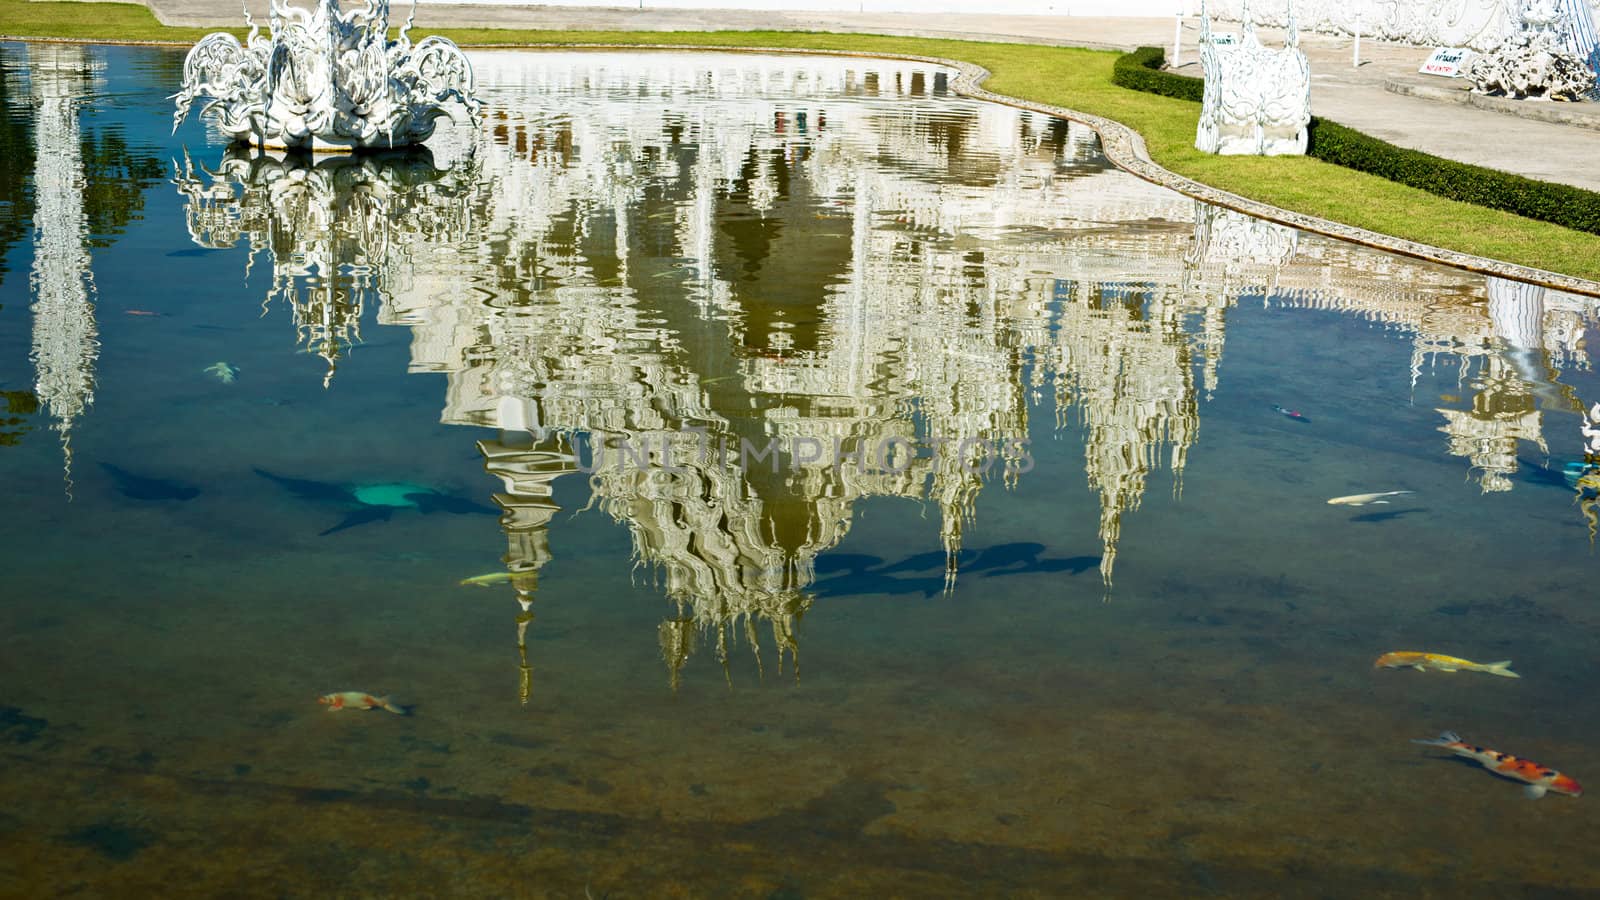 Reflection of Wat Rong Khun by timbrk